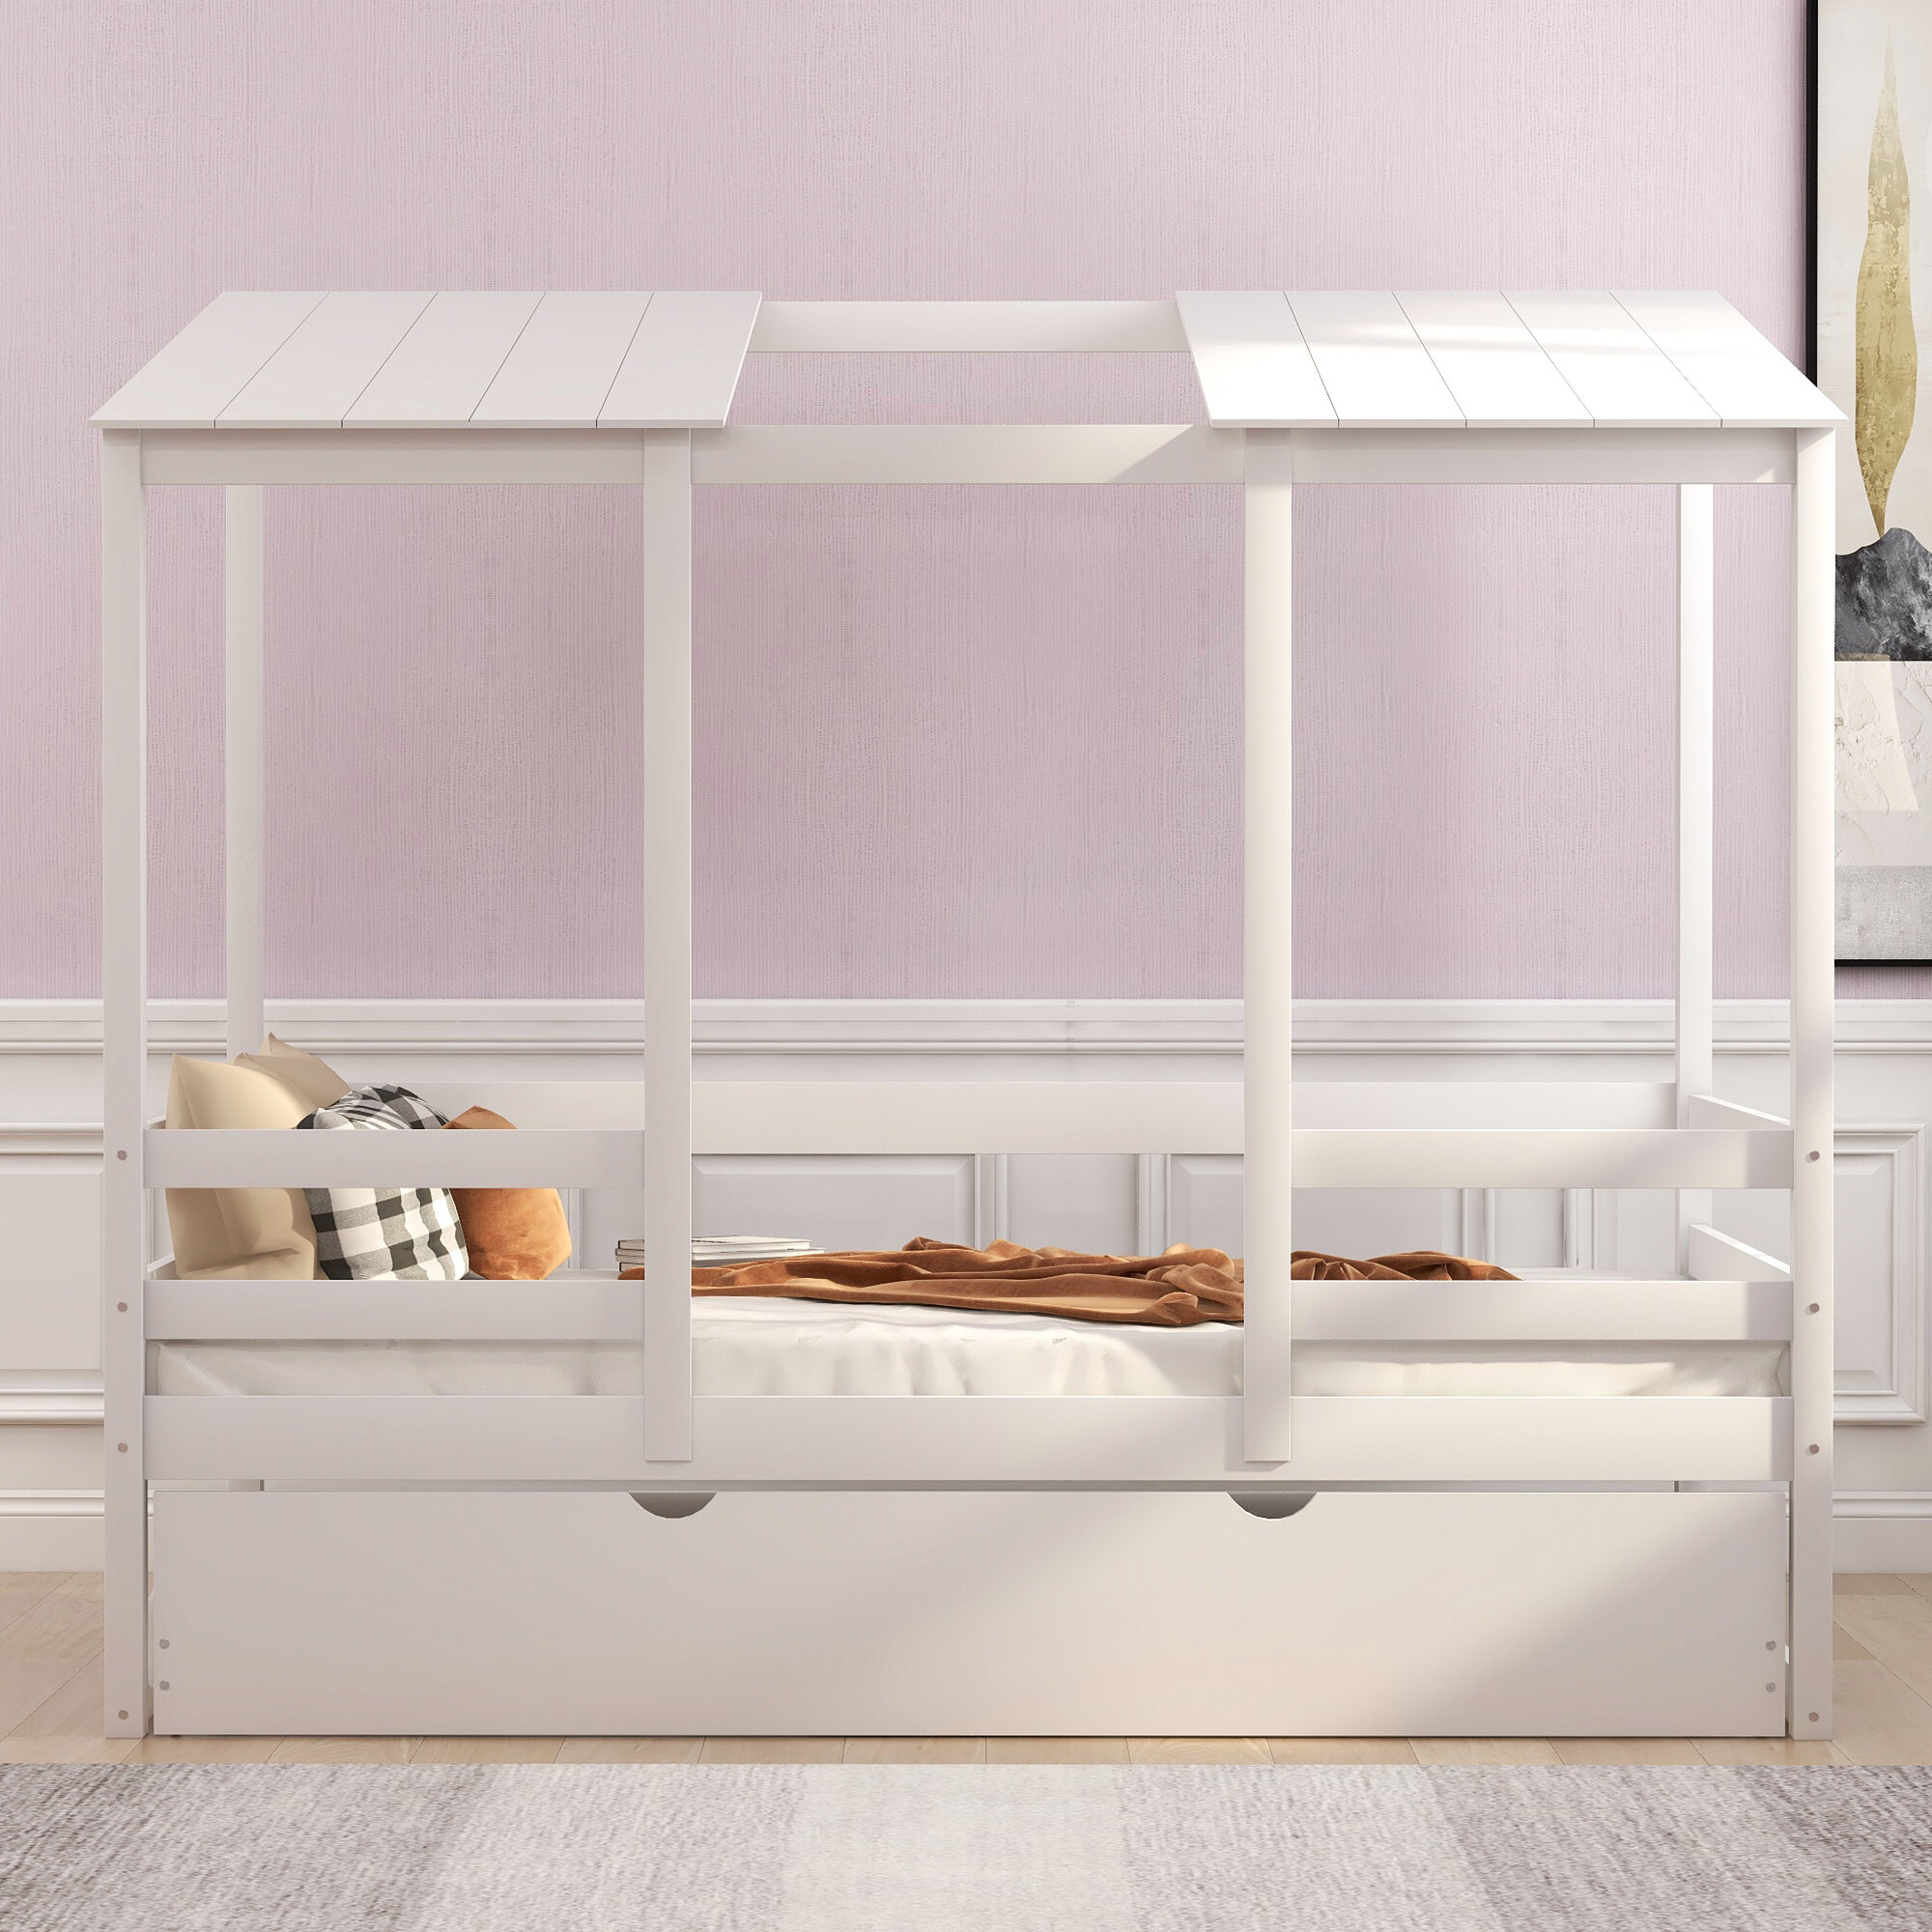 kids house bed with trundle